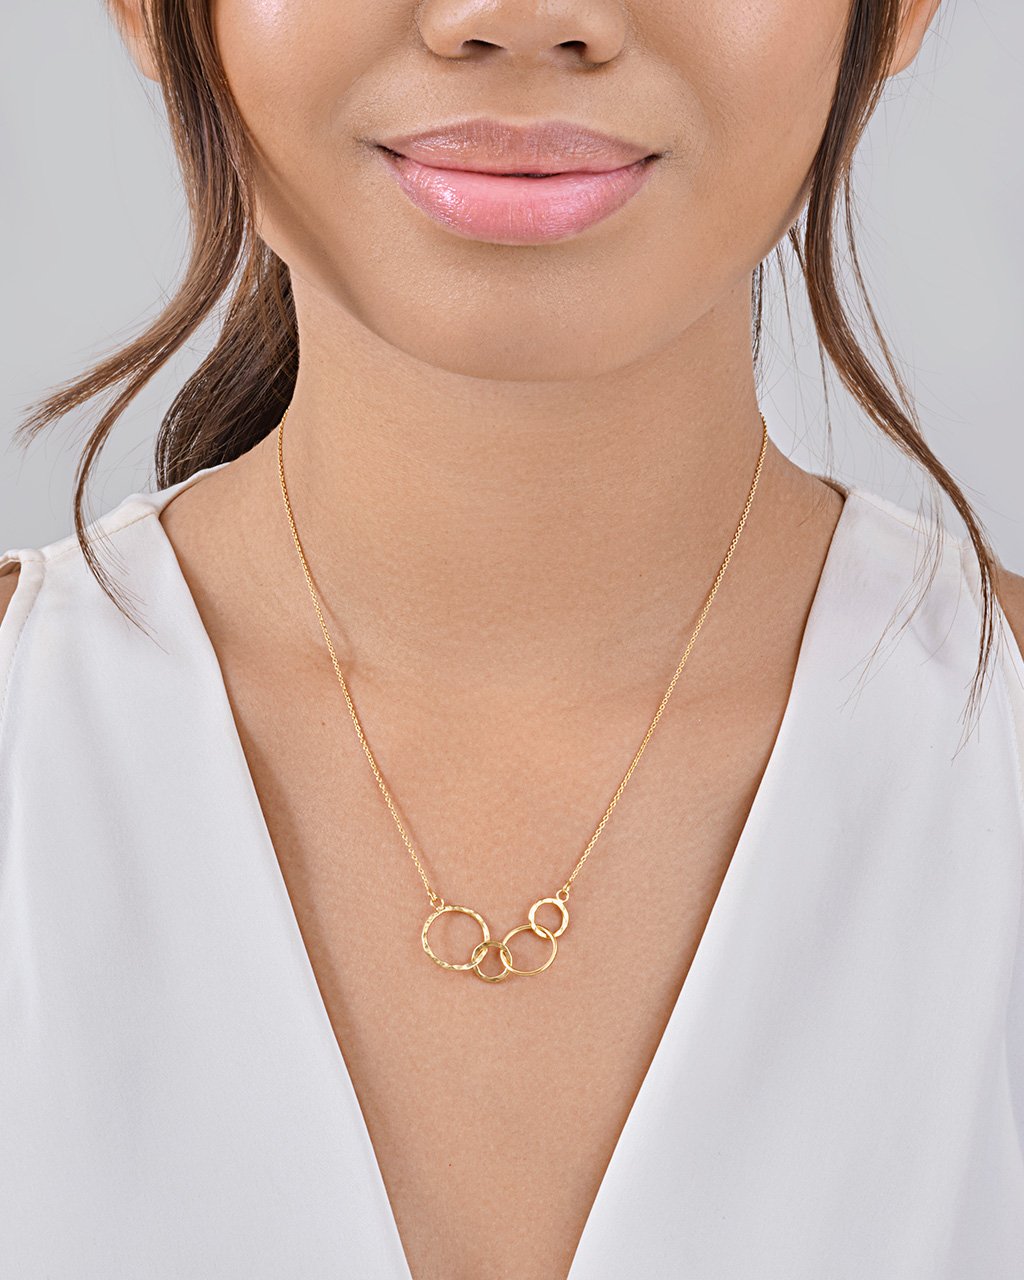 Two Tone Linked Circle Necklace – Ciunofor